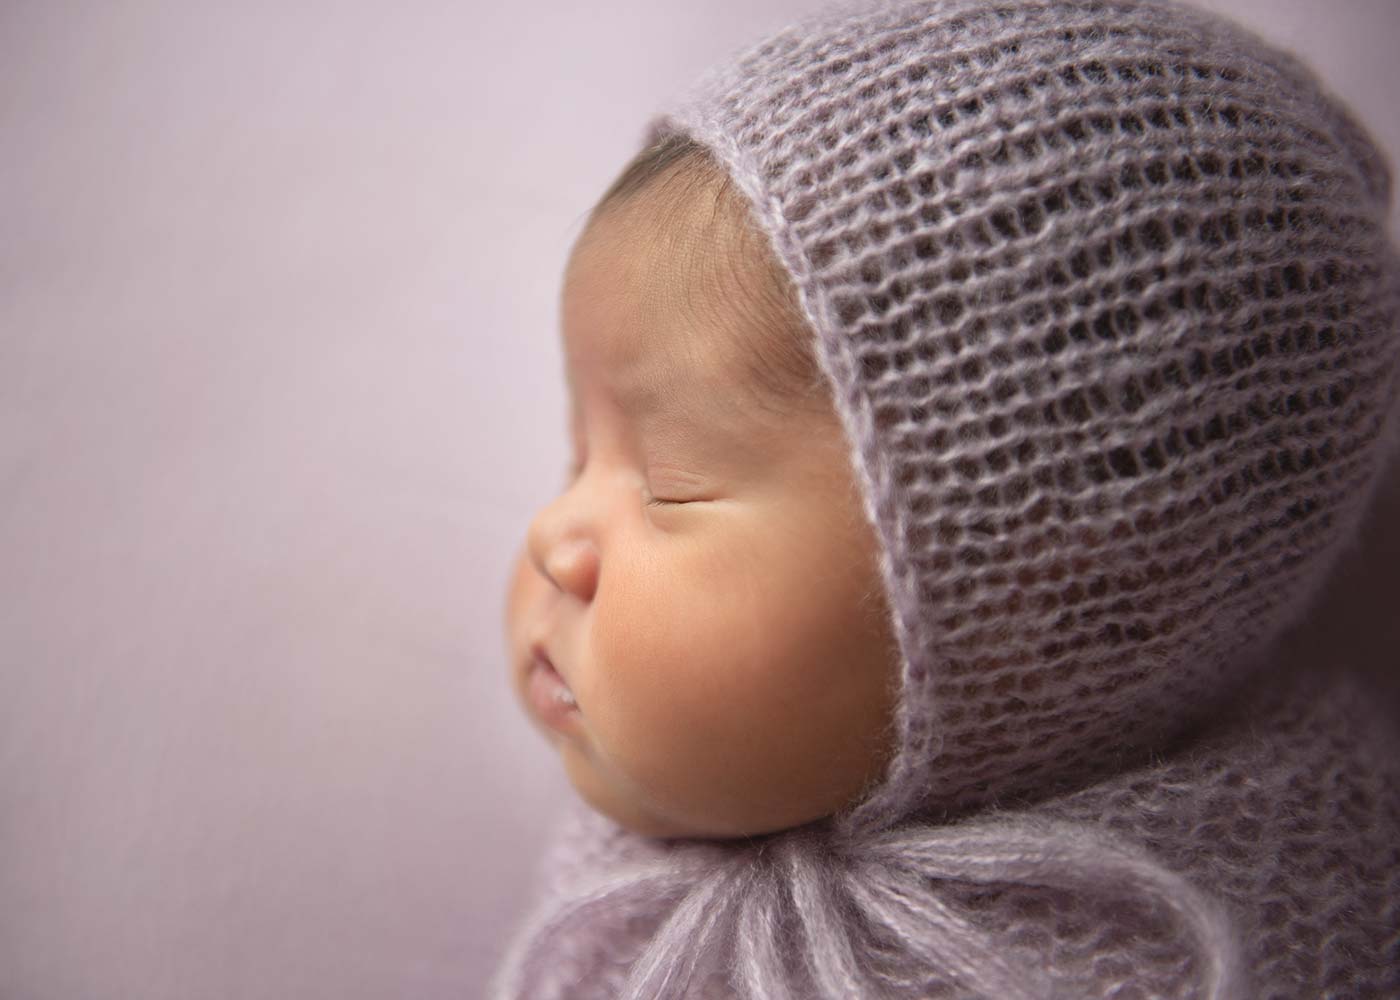 eyelashes and button nose on an infant baby